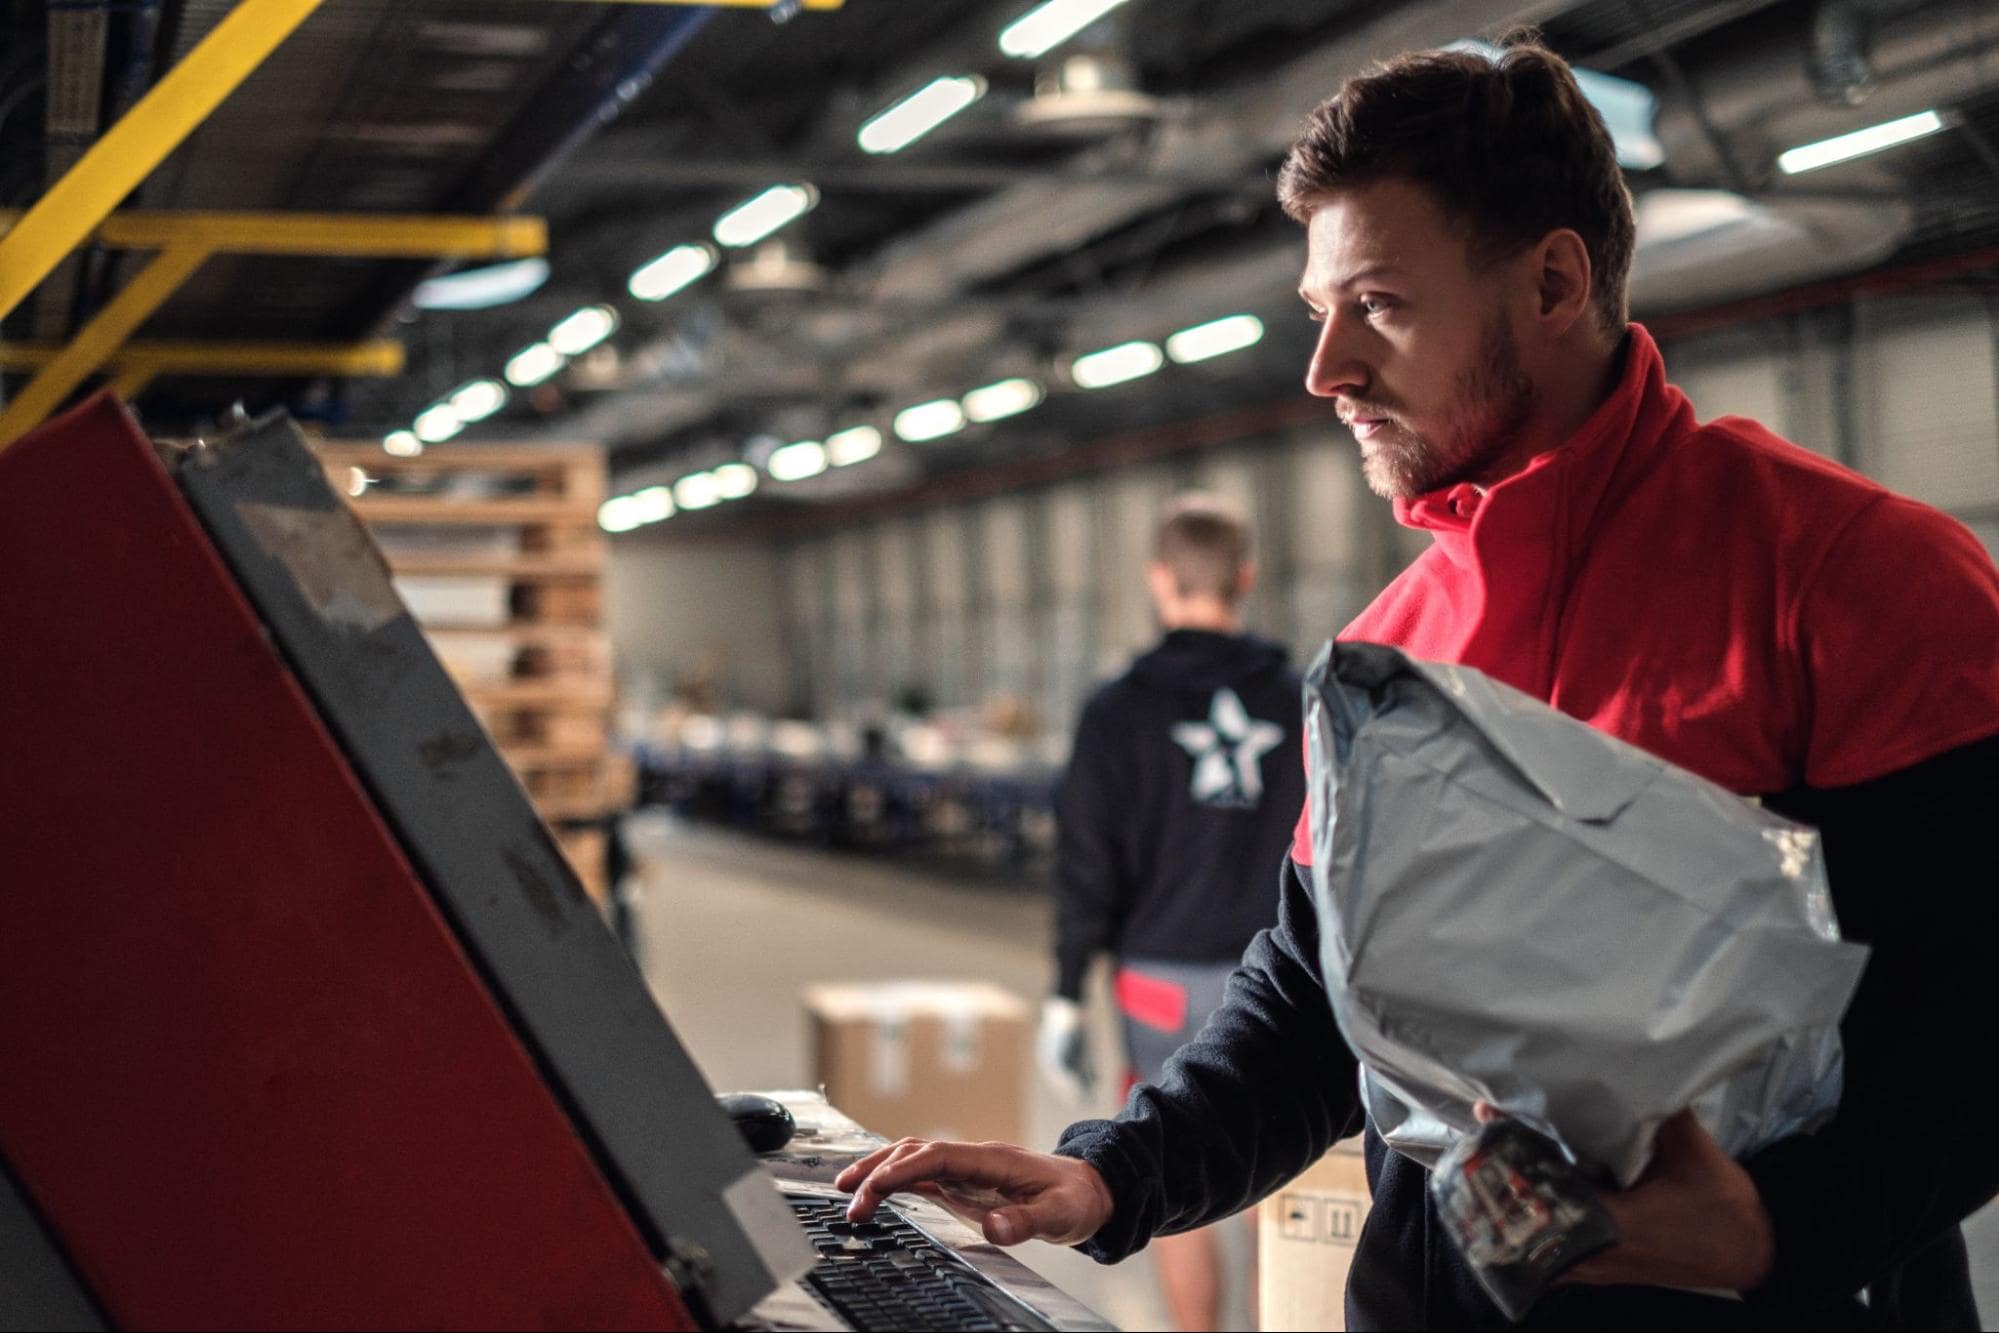 A warehouse worker holding a package and adding information to a warehouse computer.